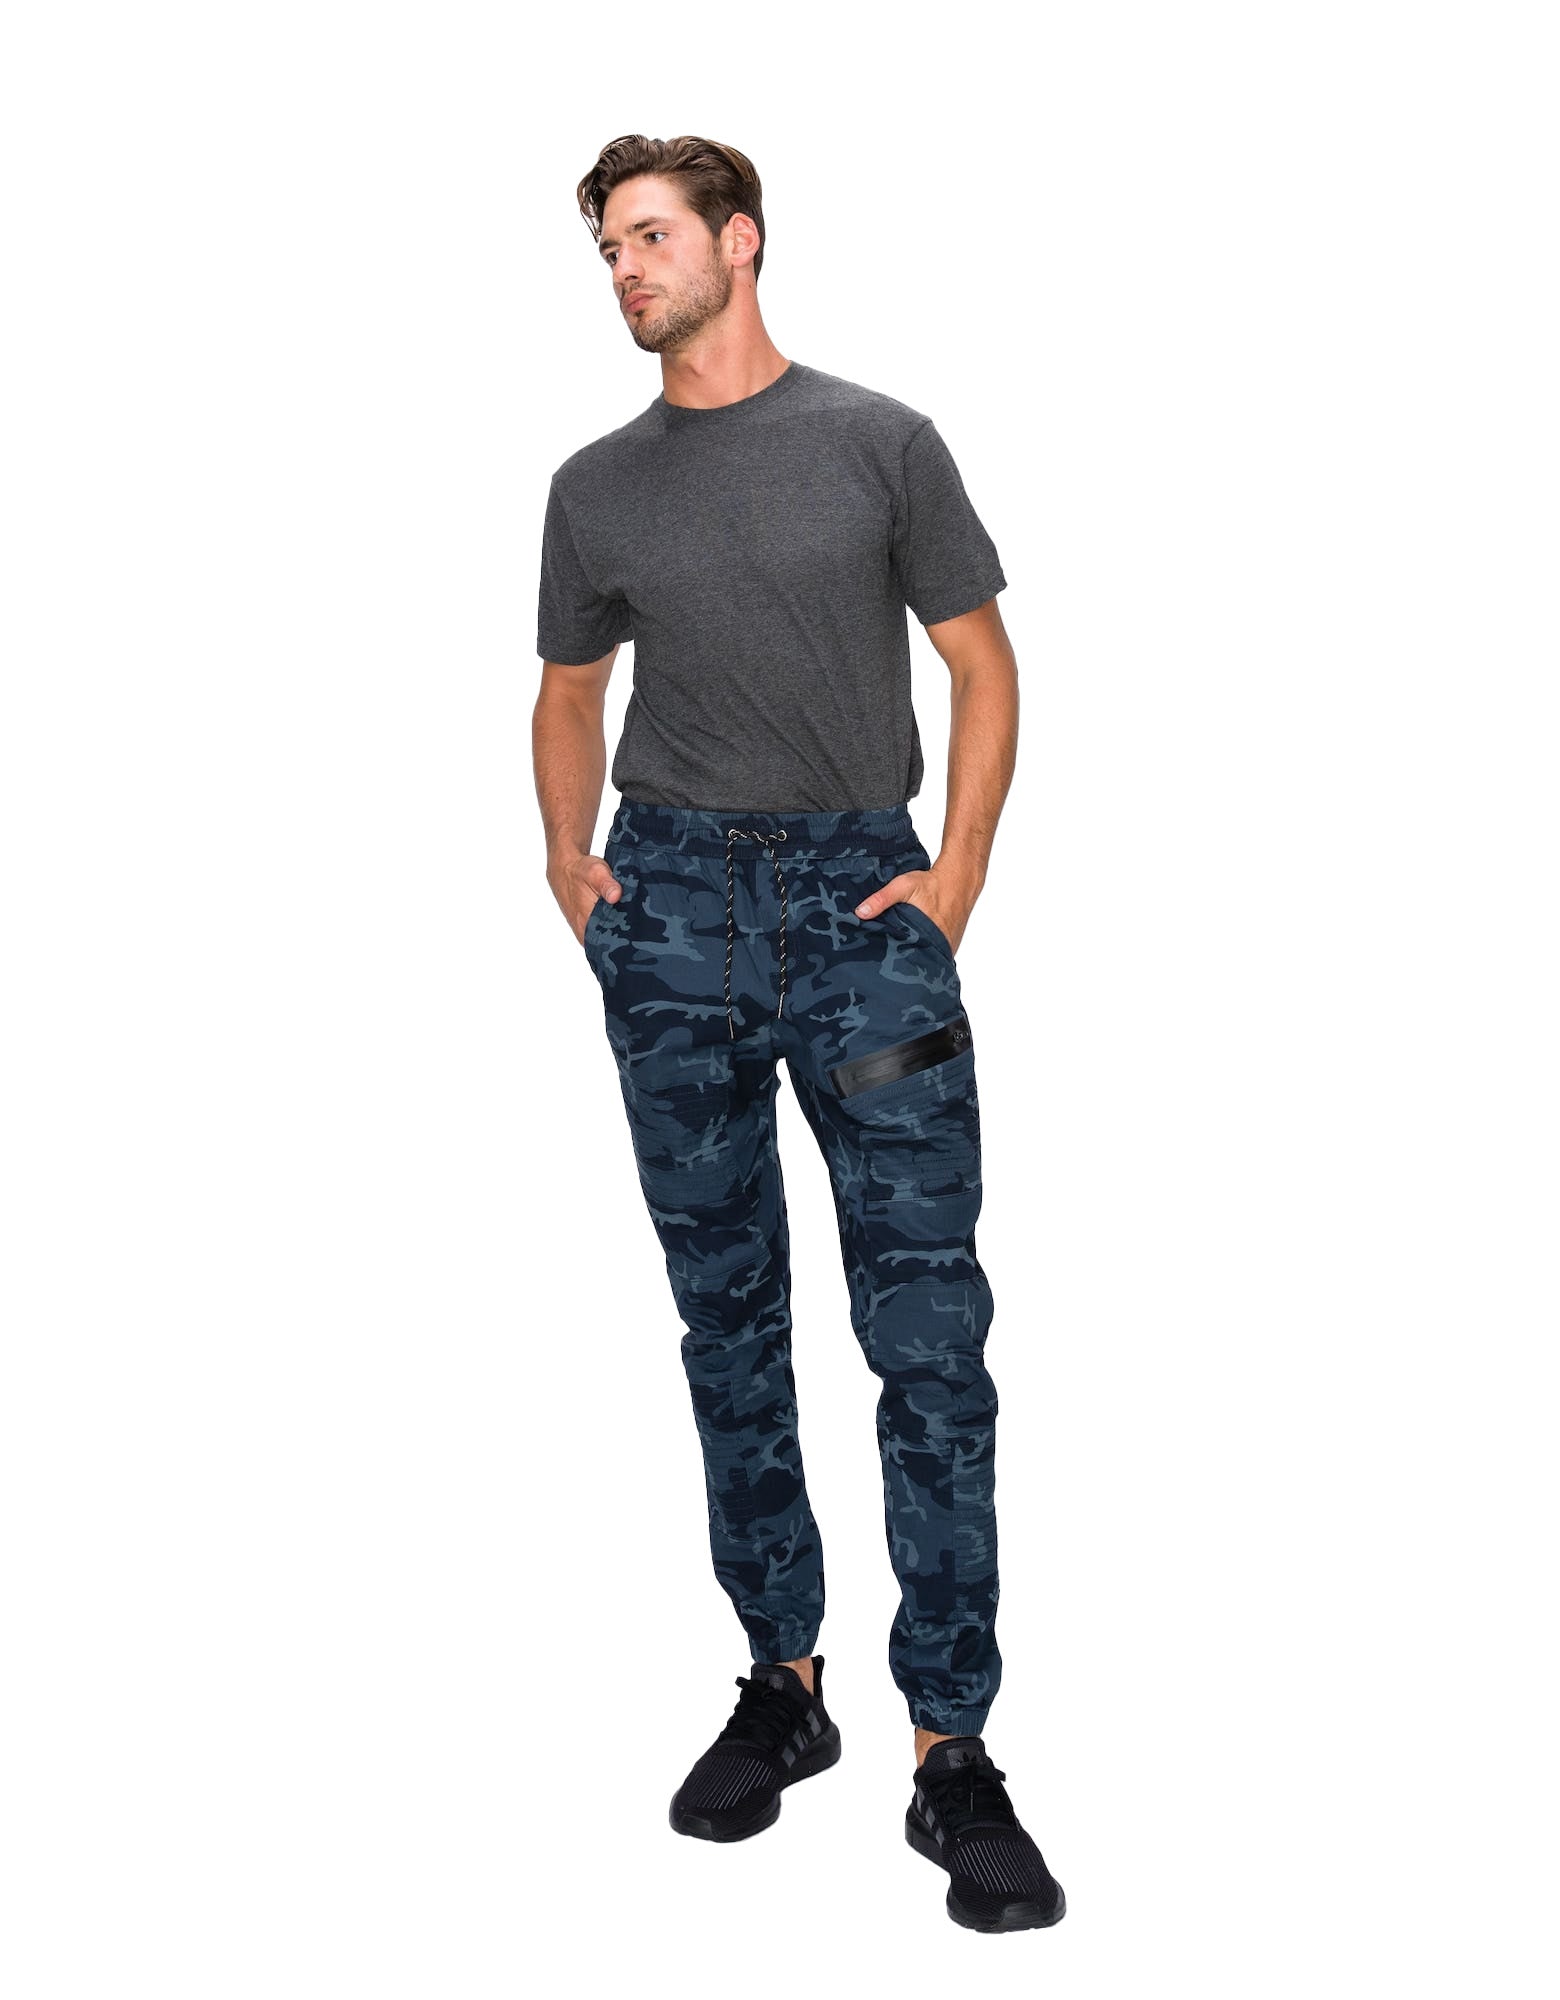 Red Camouflage Cargo Pants | Red Military Cargo Pants | Men Cargo Trousers  Red - Cargo - Aliexpress